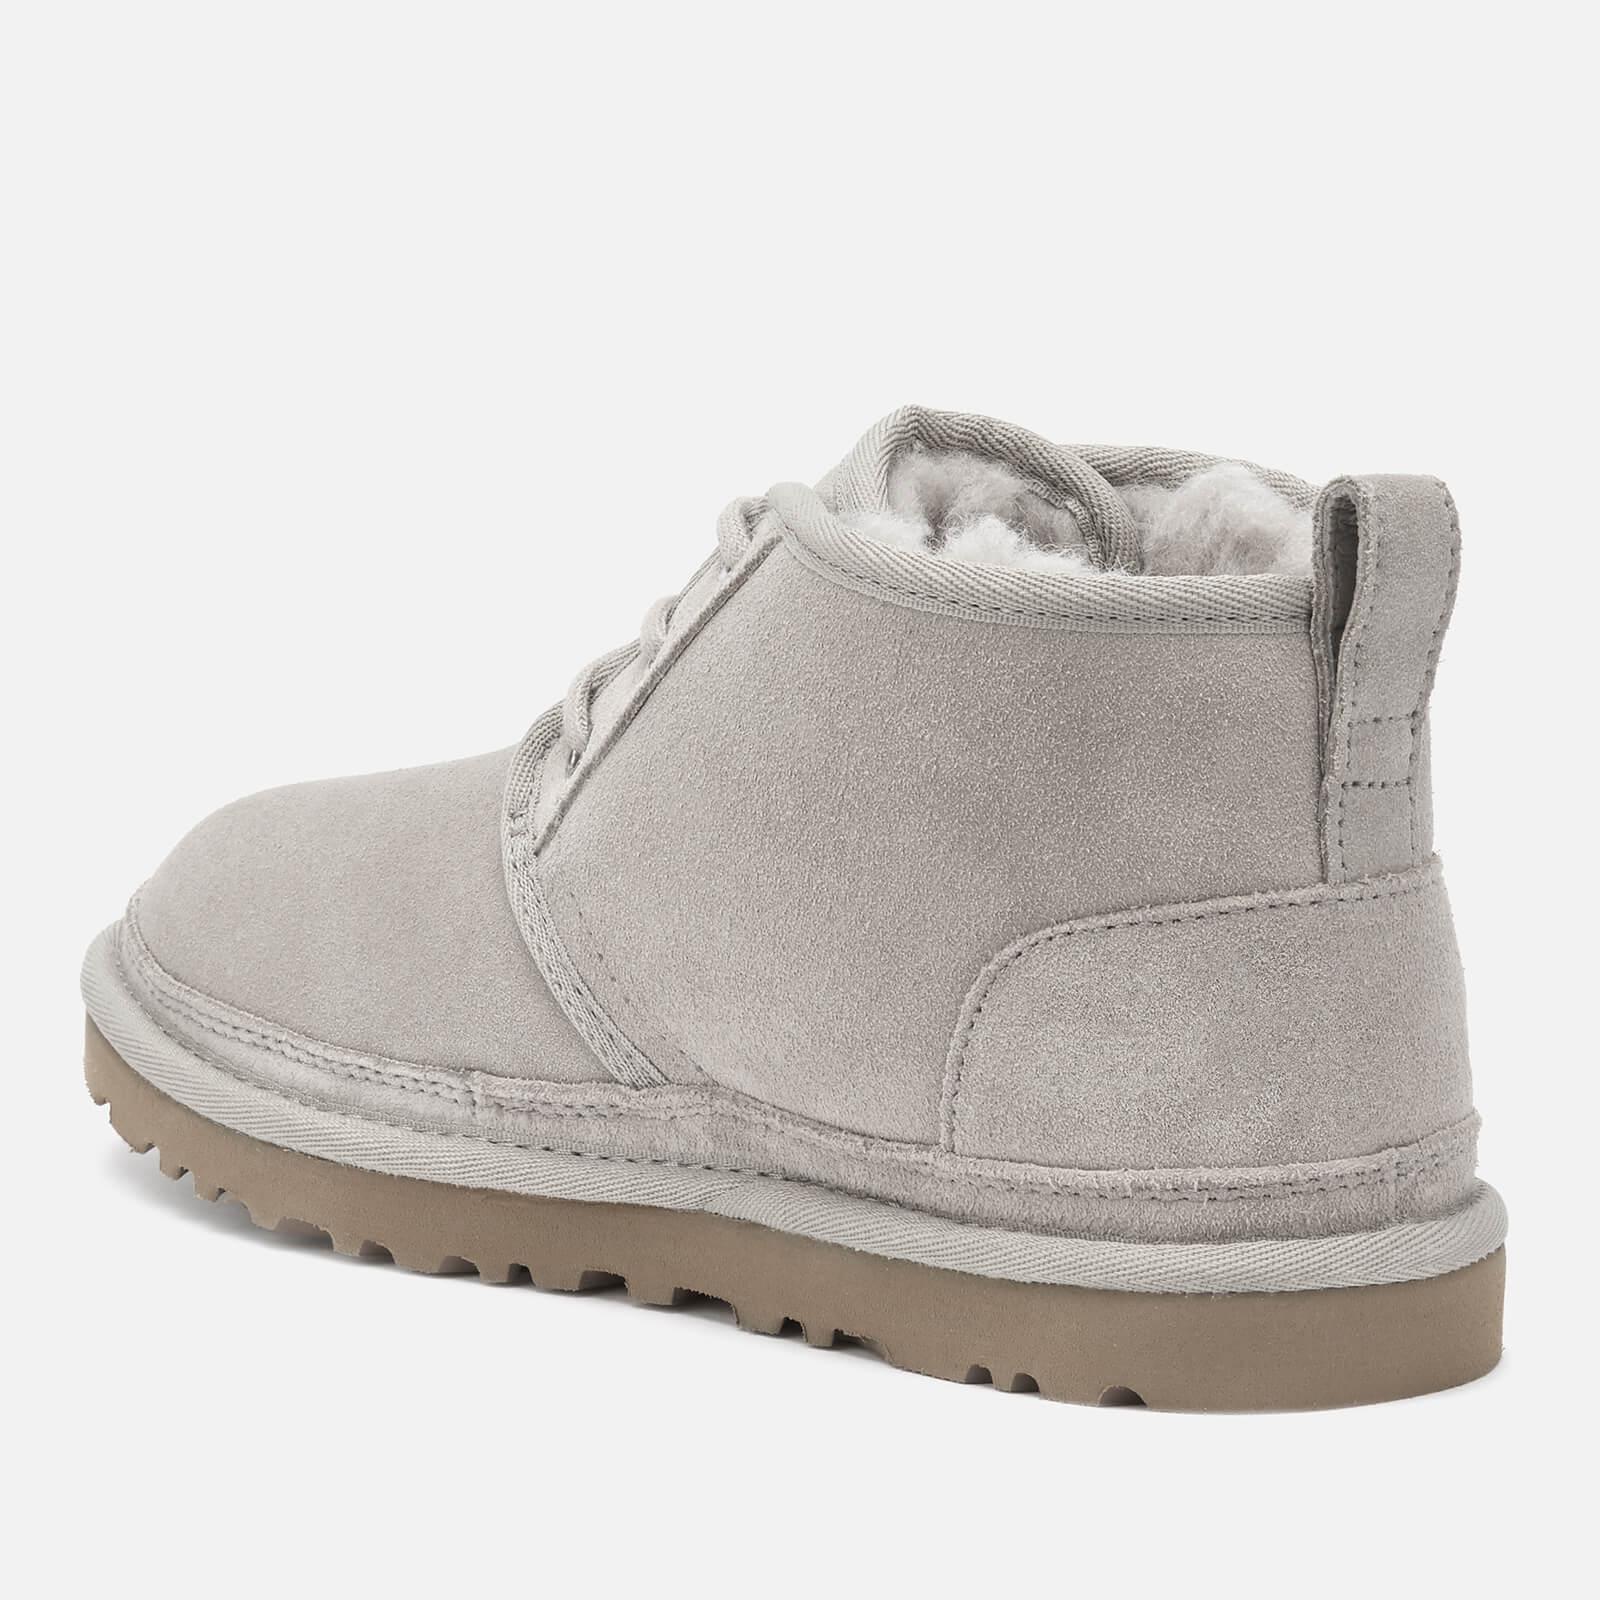 UGG Neumel Boots in Gray | Lyst